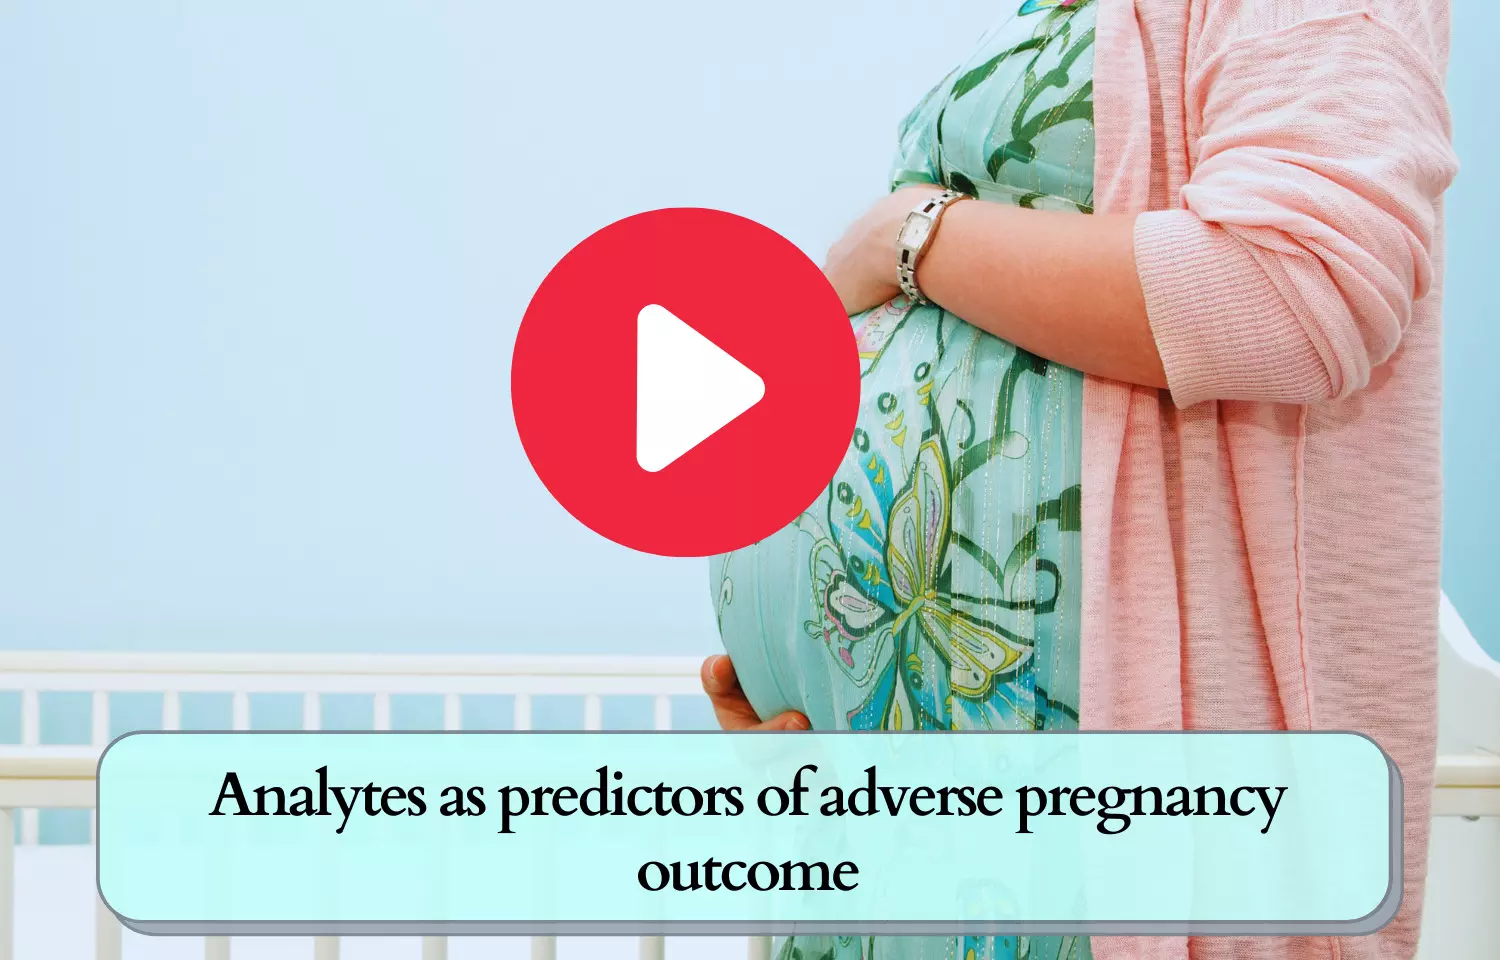 Analytes to be the better predictors of adverse pregnancy outcome